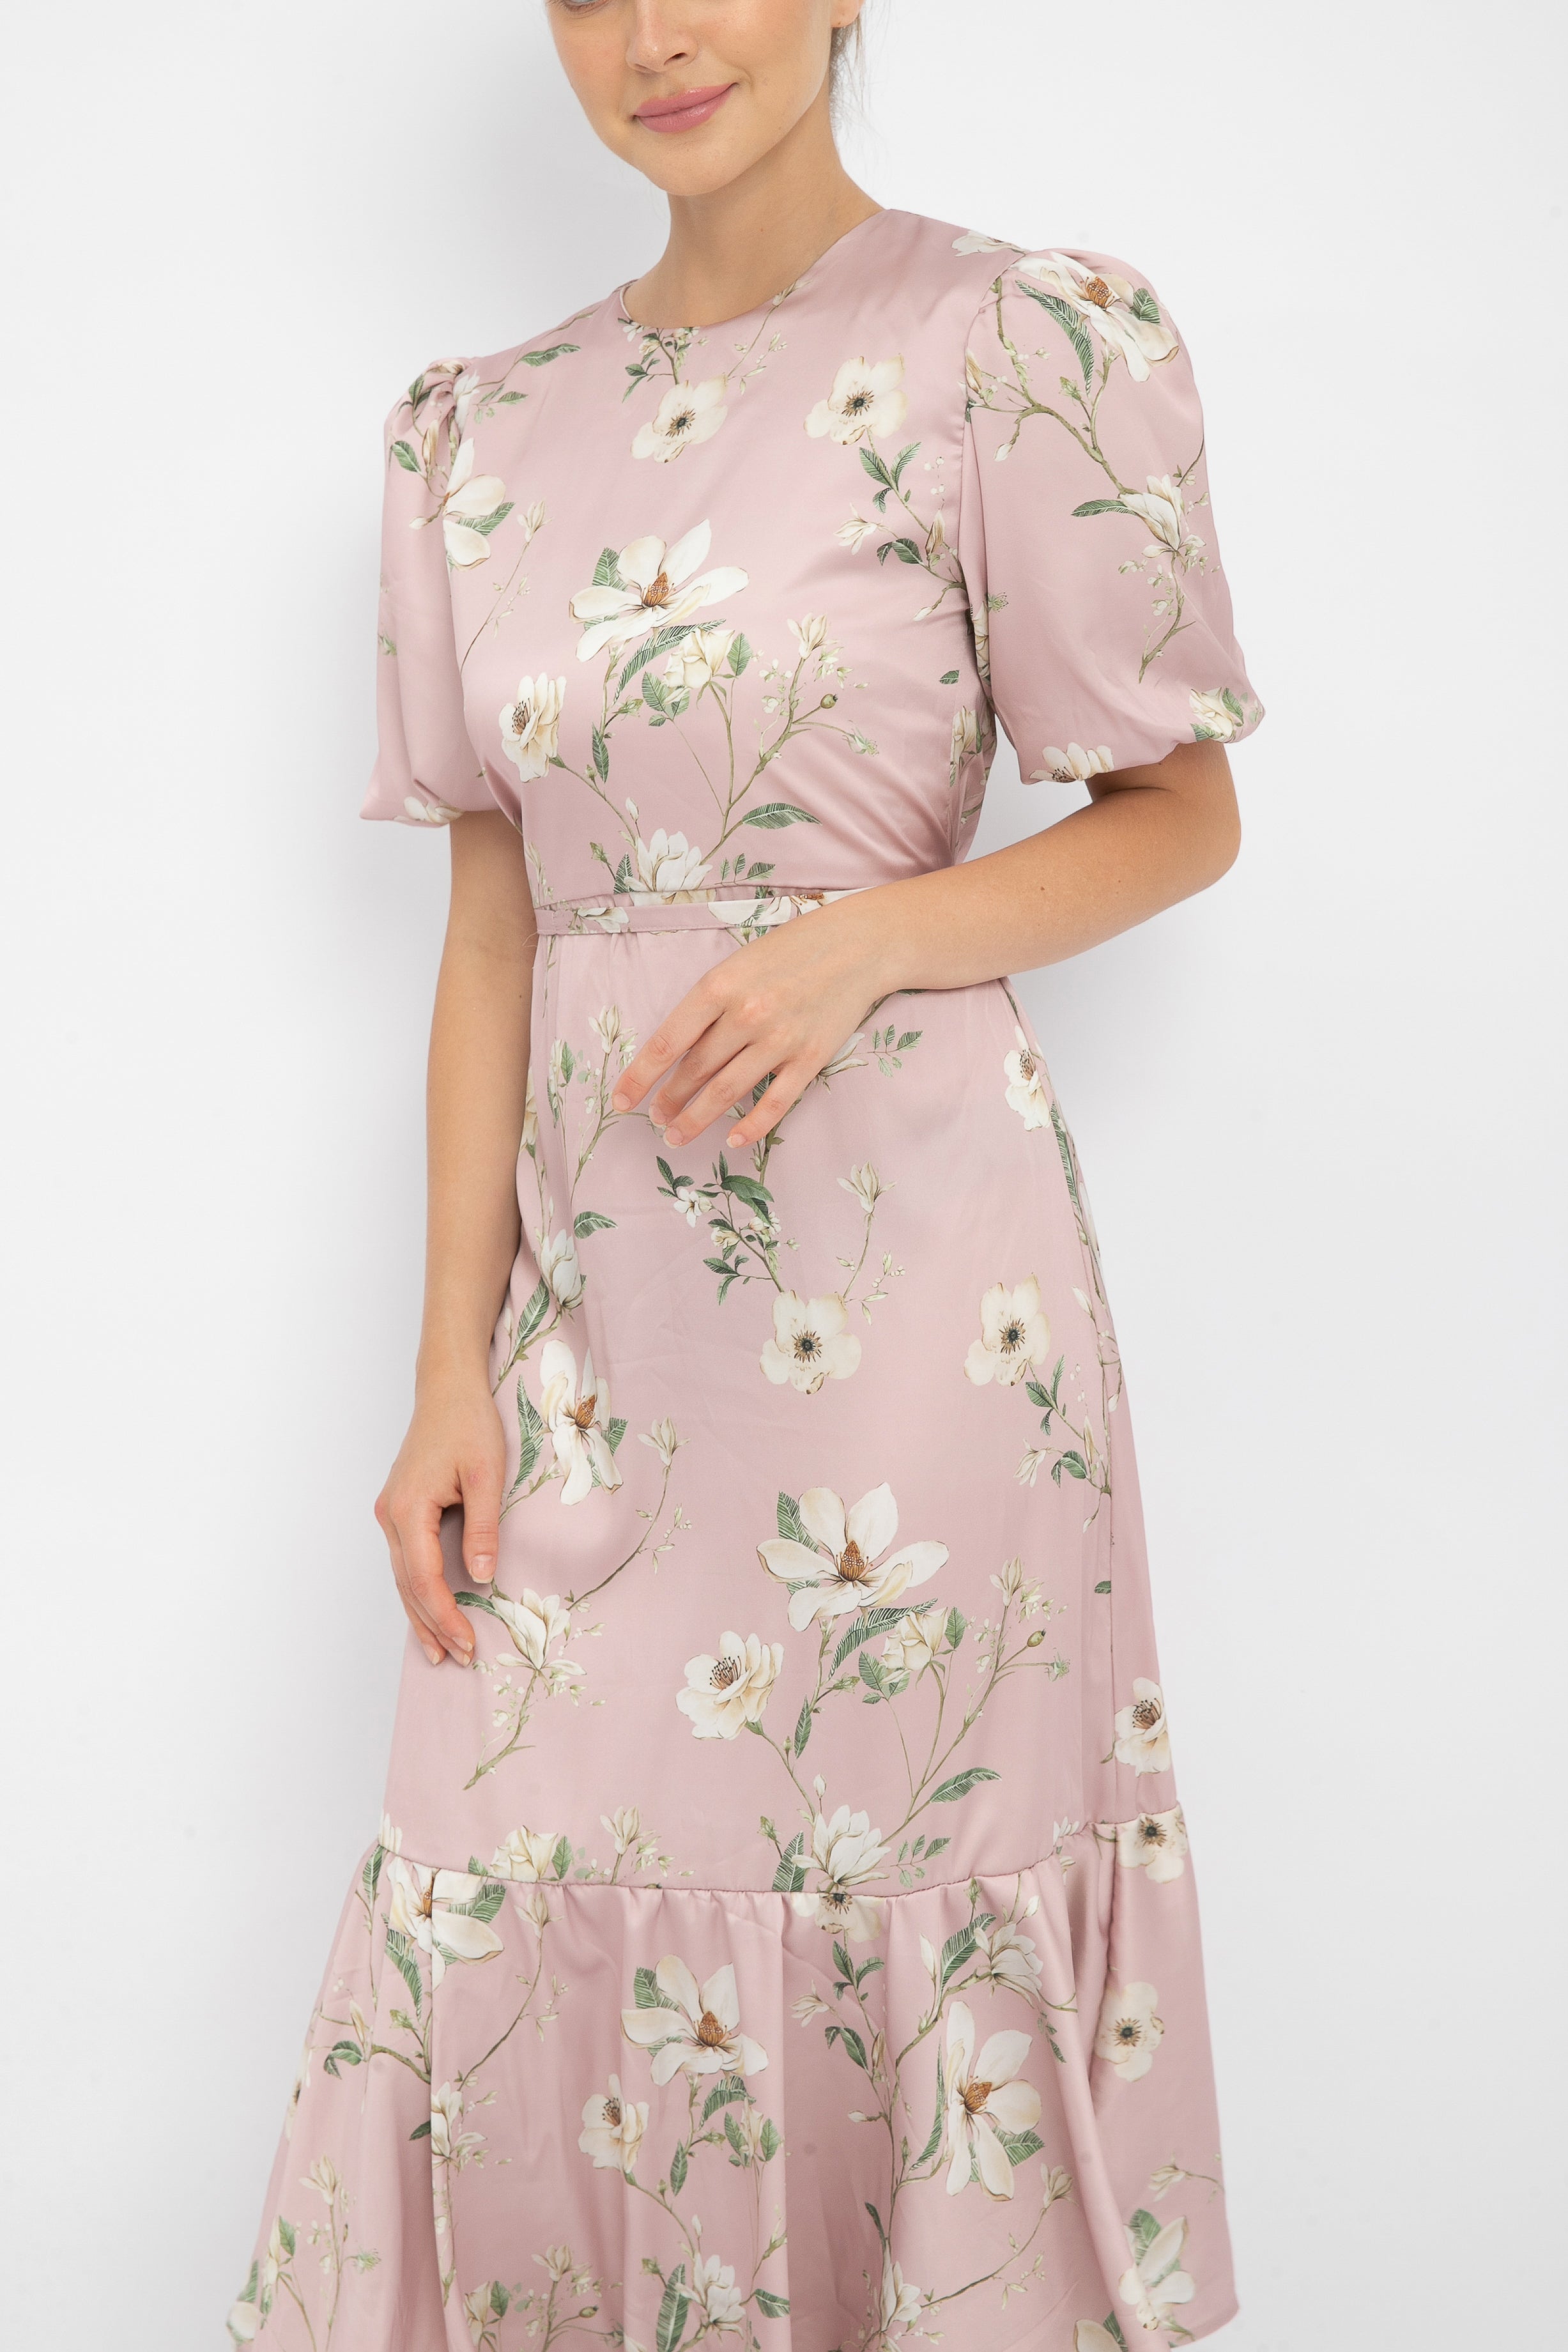 Cadence Dress in Pink